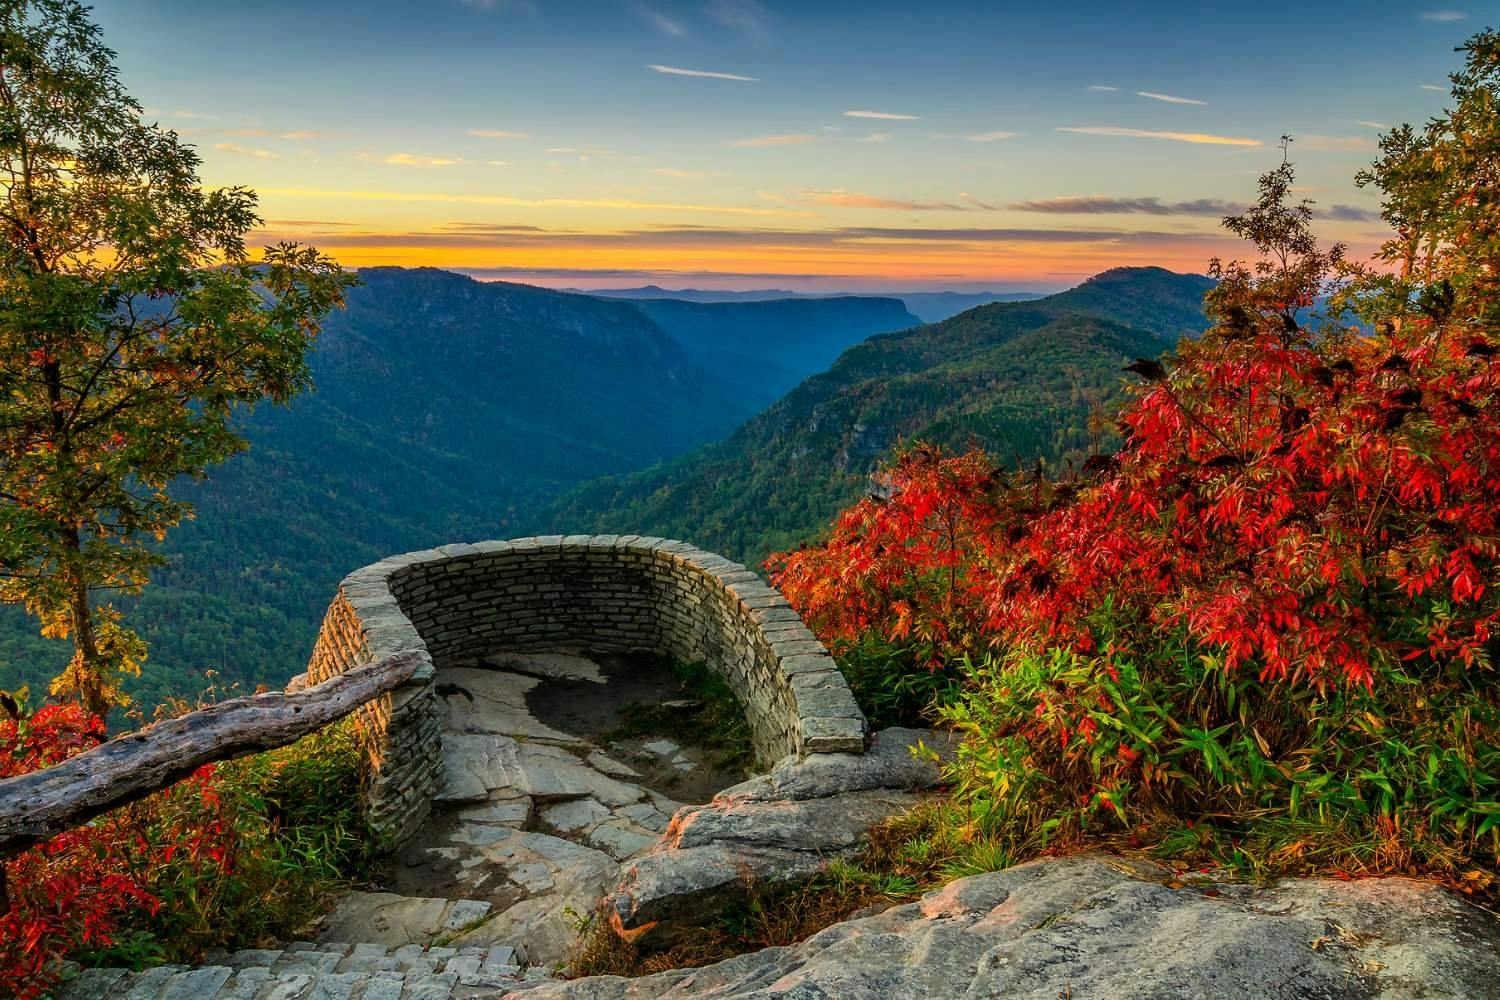 Blue Ridge Parkway Self-Guided Audio Tour from Asheville to Roanoke